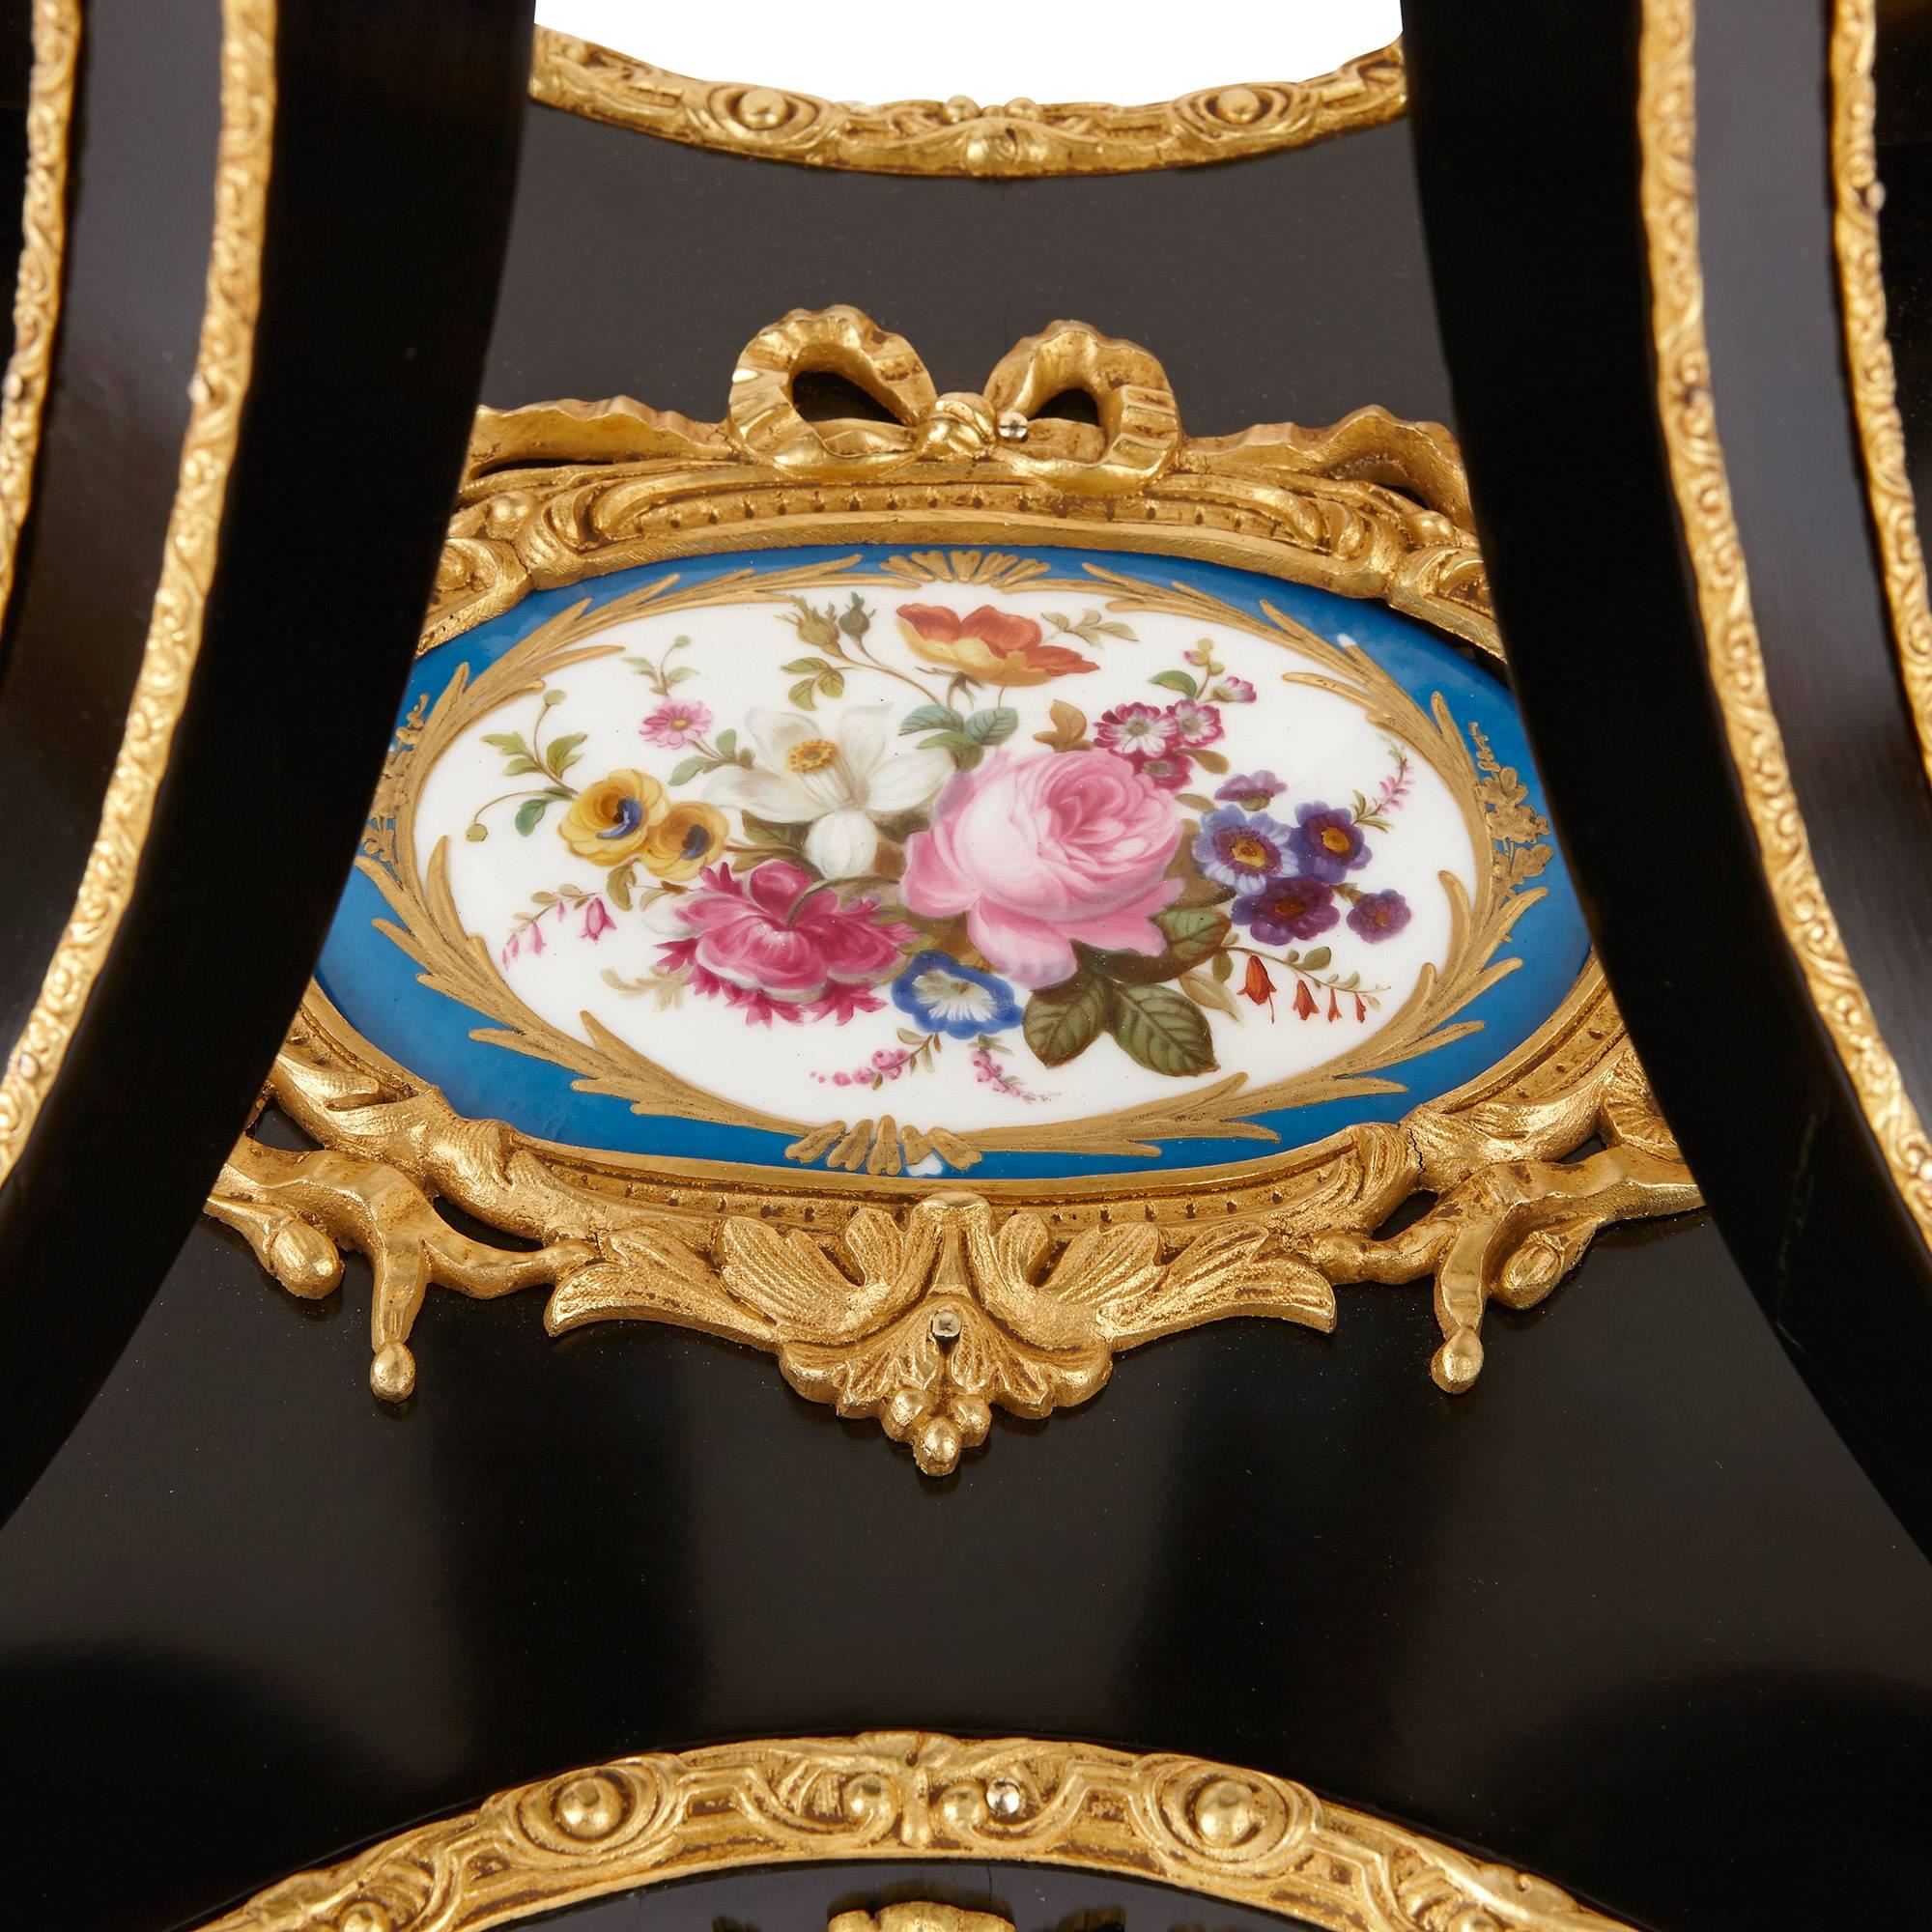 19th Century Ormolu-Mounted Sèvres Porcelain and Ebonized Wood Side Table For Sale